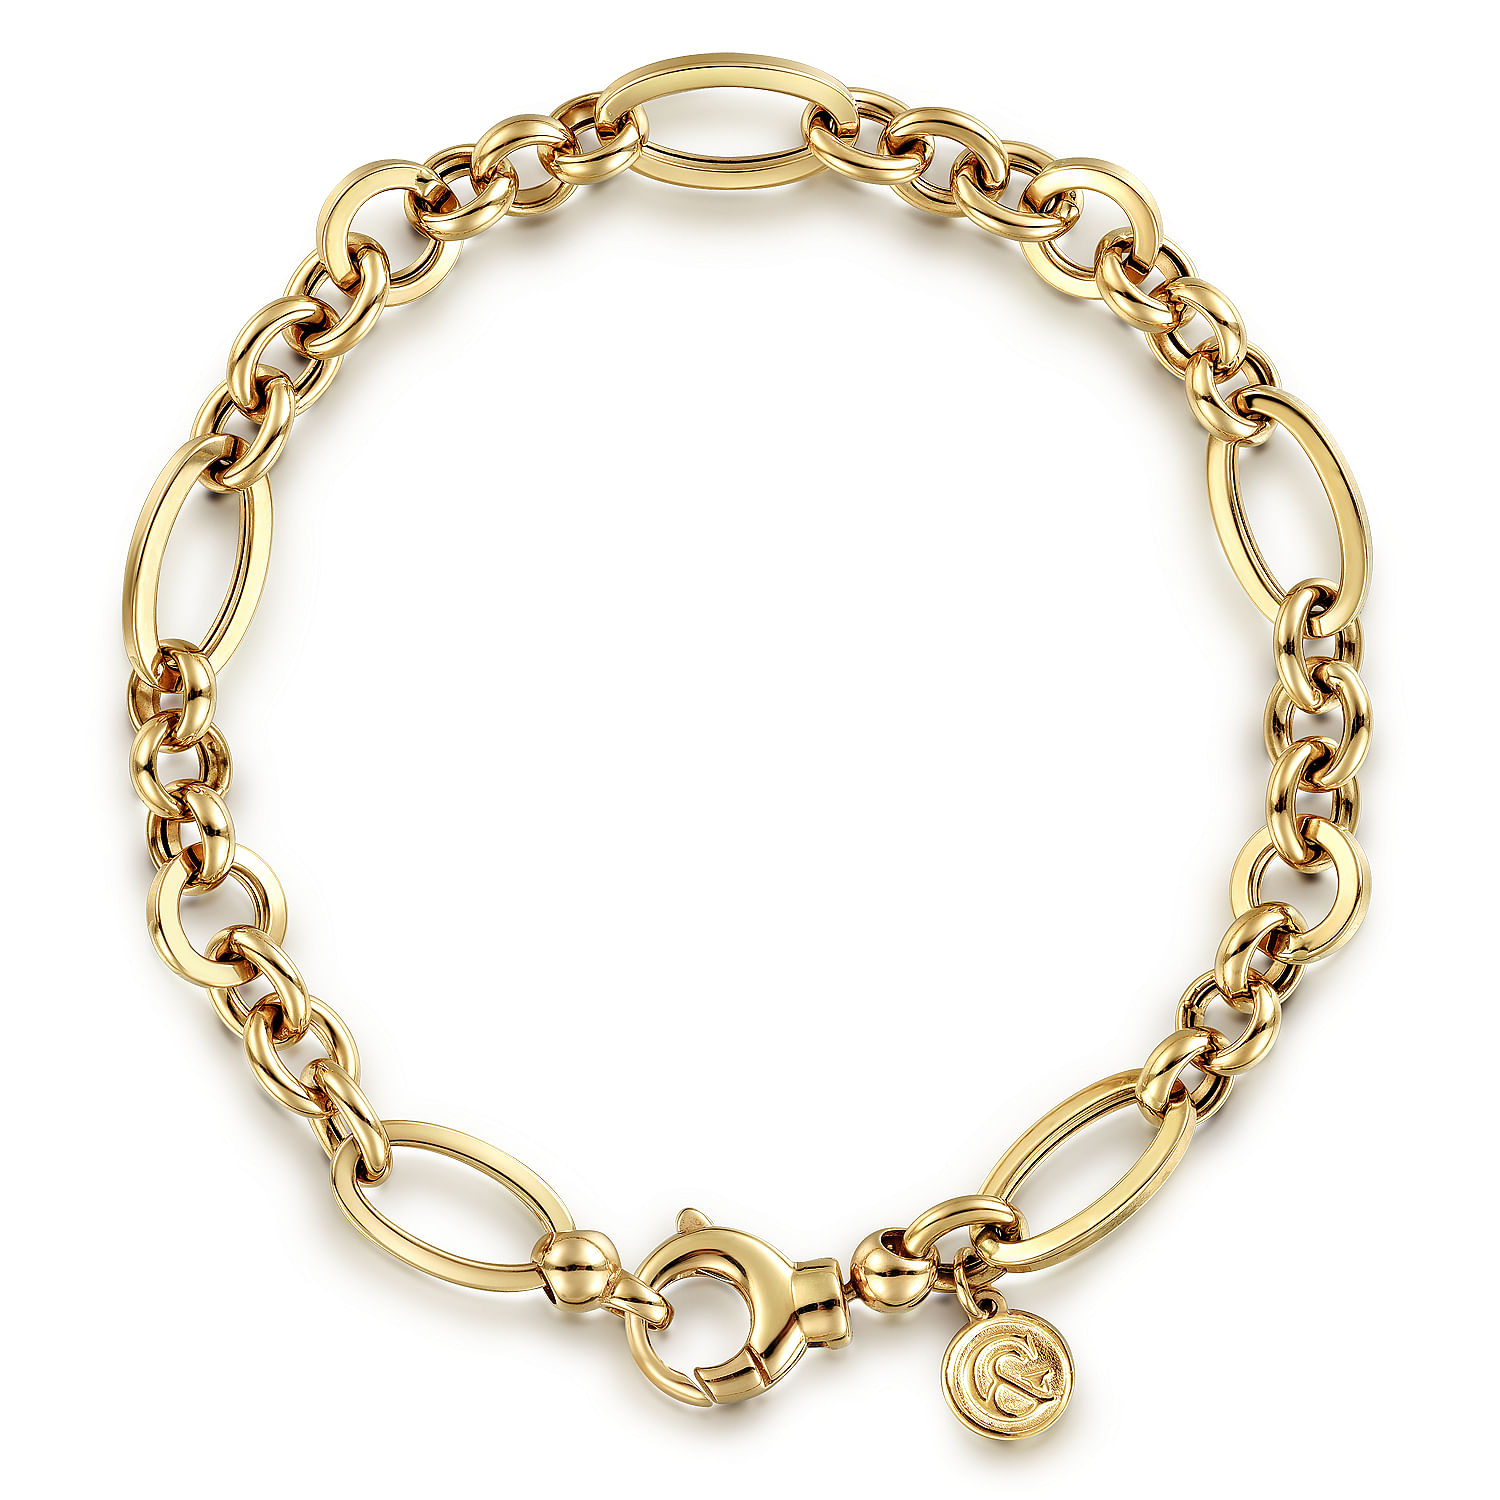 7 inch 14K Yellow Gold Hollow Figaro Link Chain Bracelet